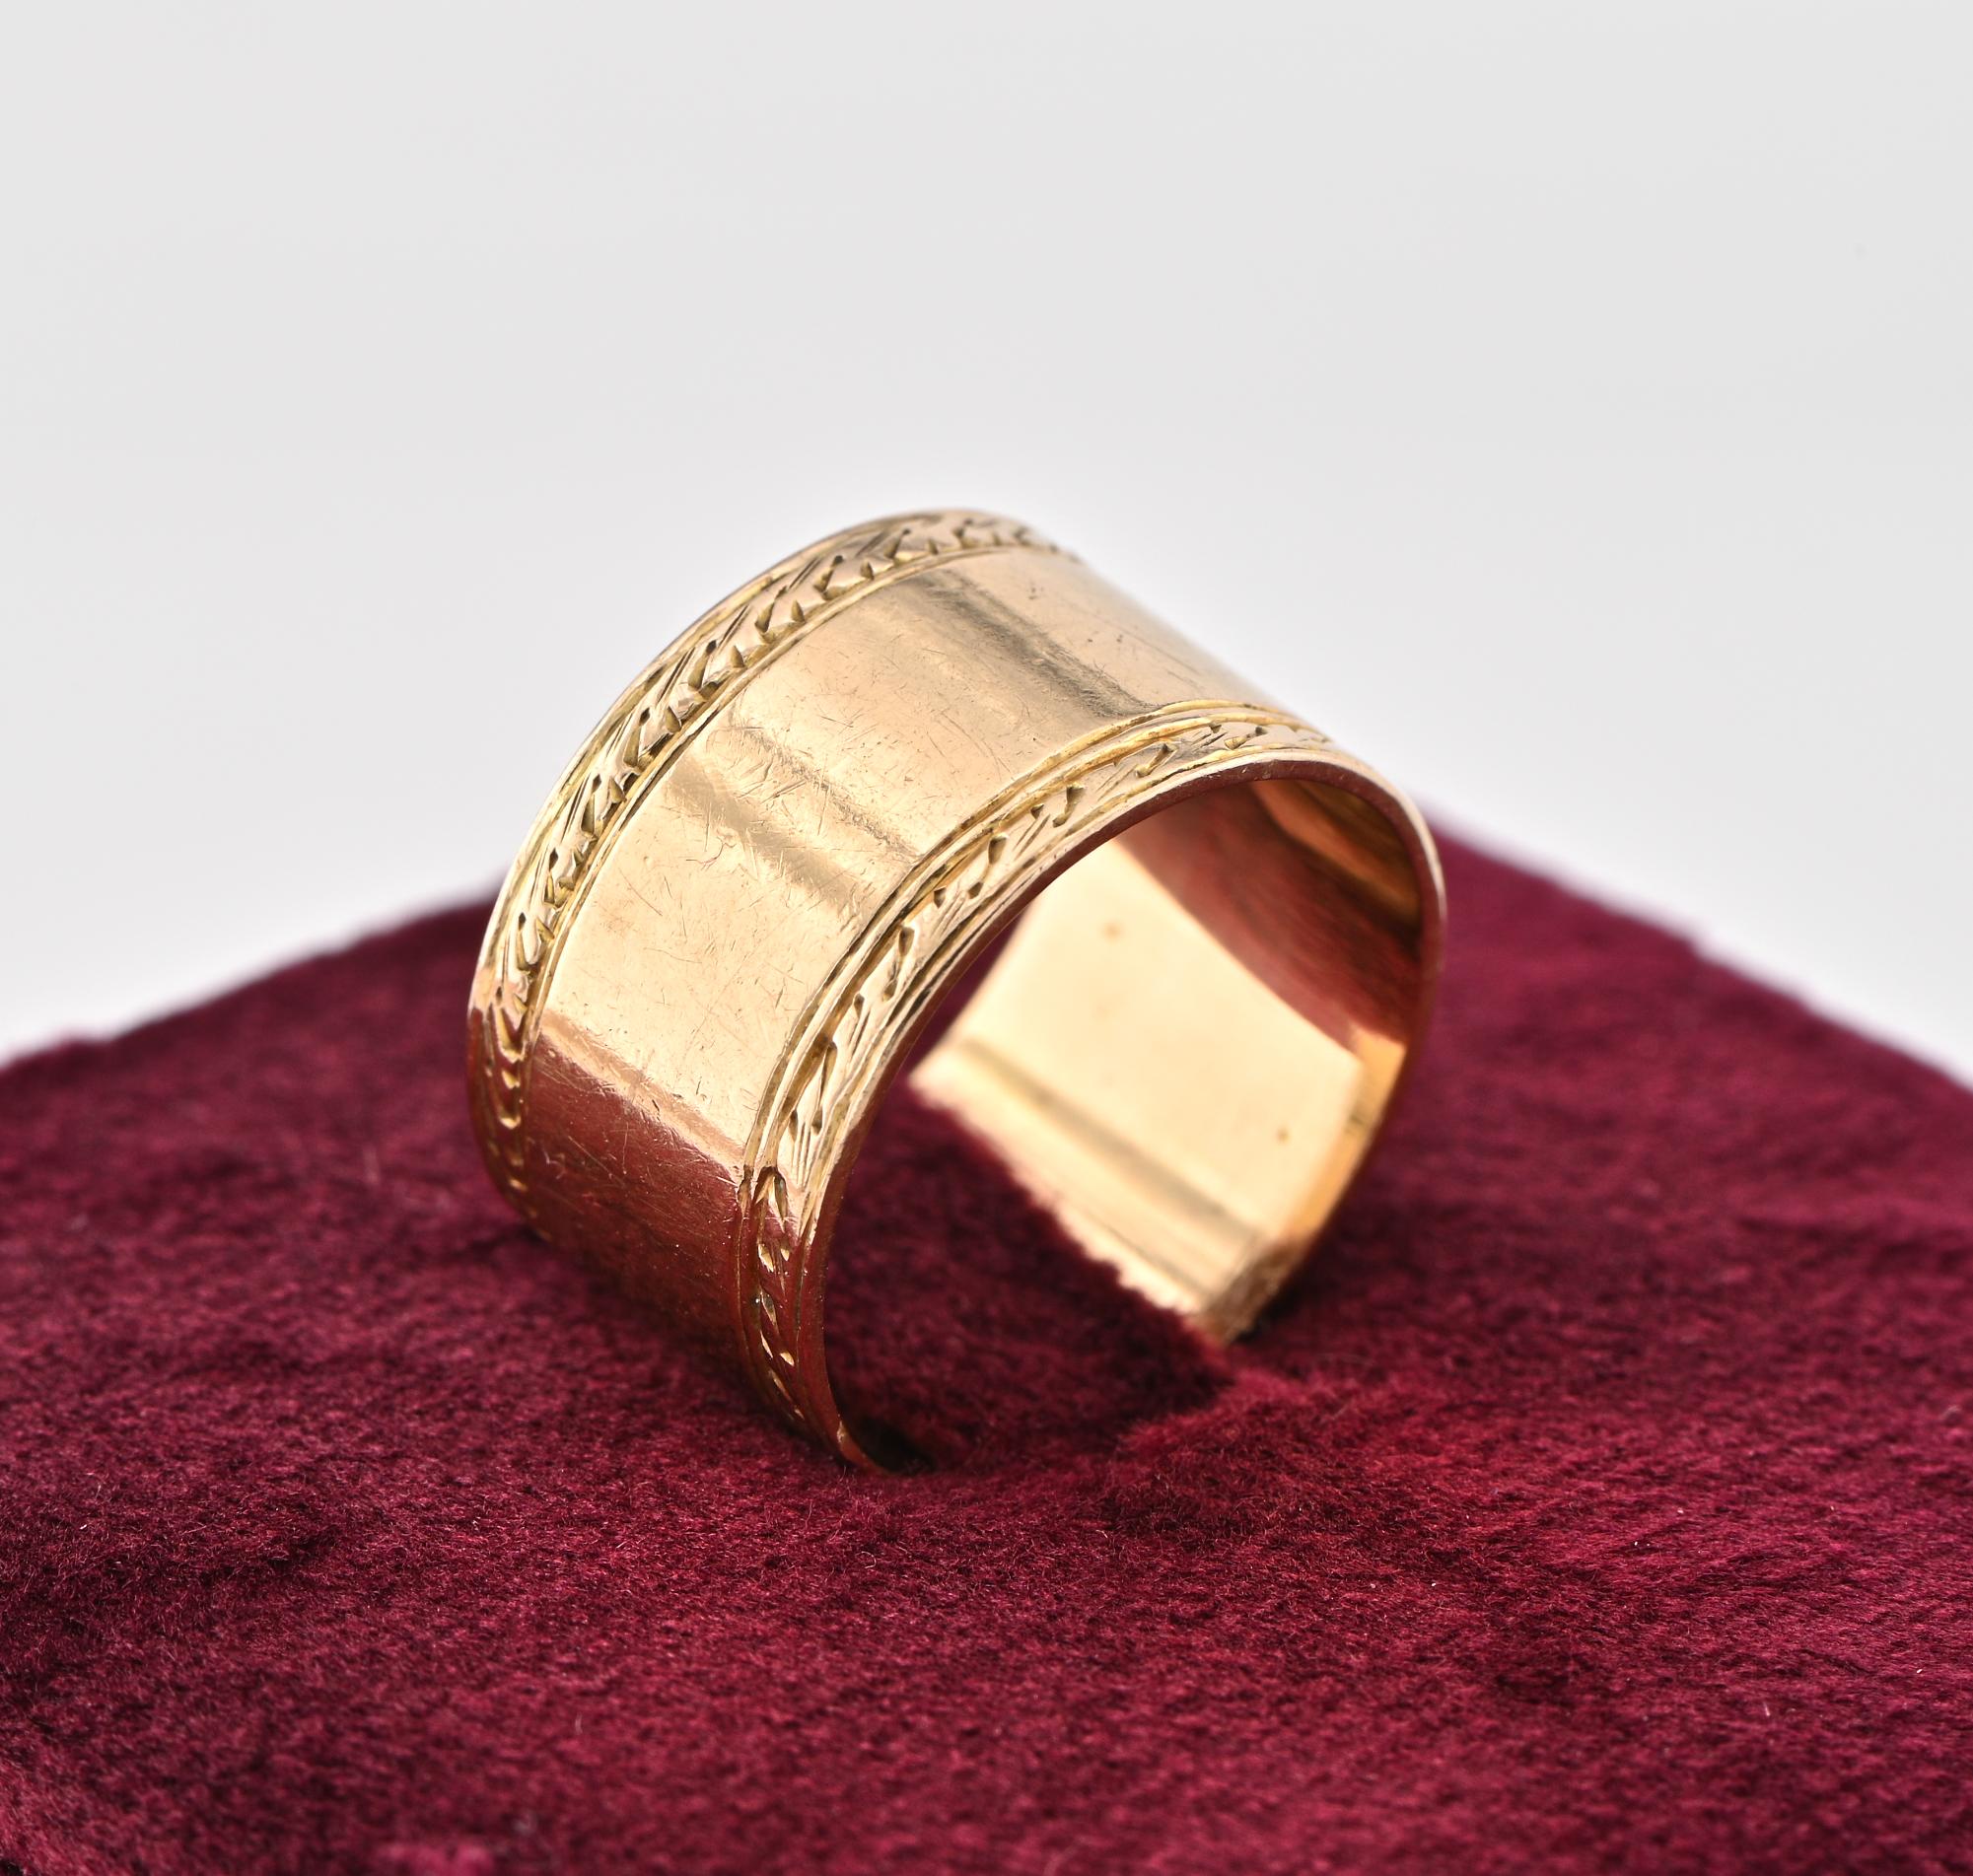 Victoriana Memories
This interesting and quite rare antique wedding band ring is Victorian dating 1880
Hand crafted of solid 18 KT gold tested
It is substantially hand crafted in a beautiful Etruscan revival design in vogue during 1880 ca, plain